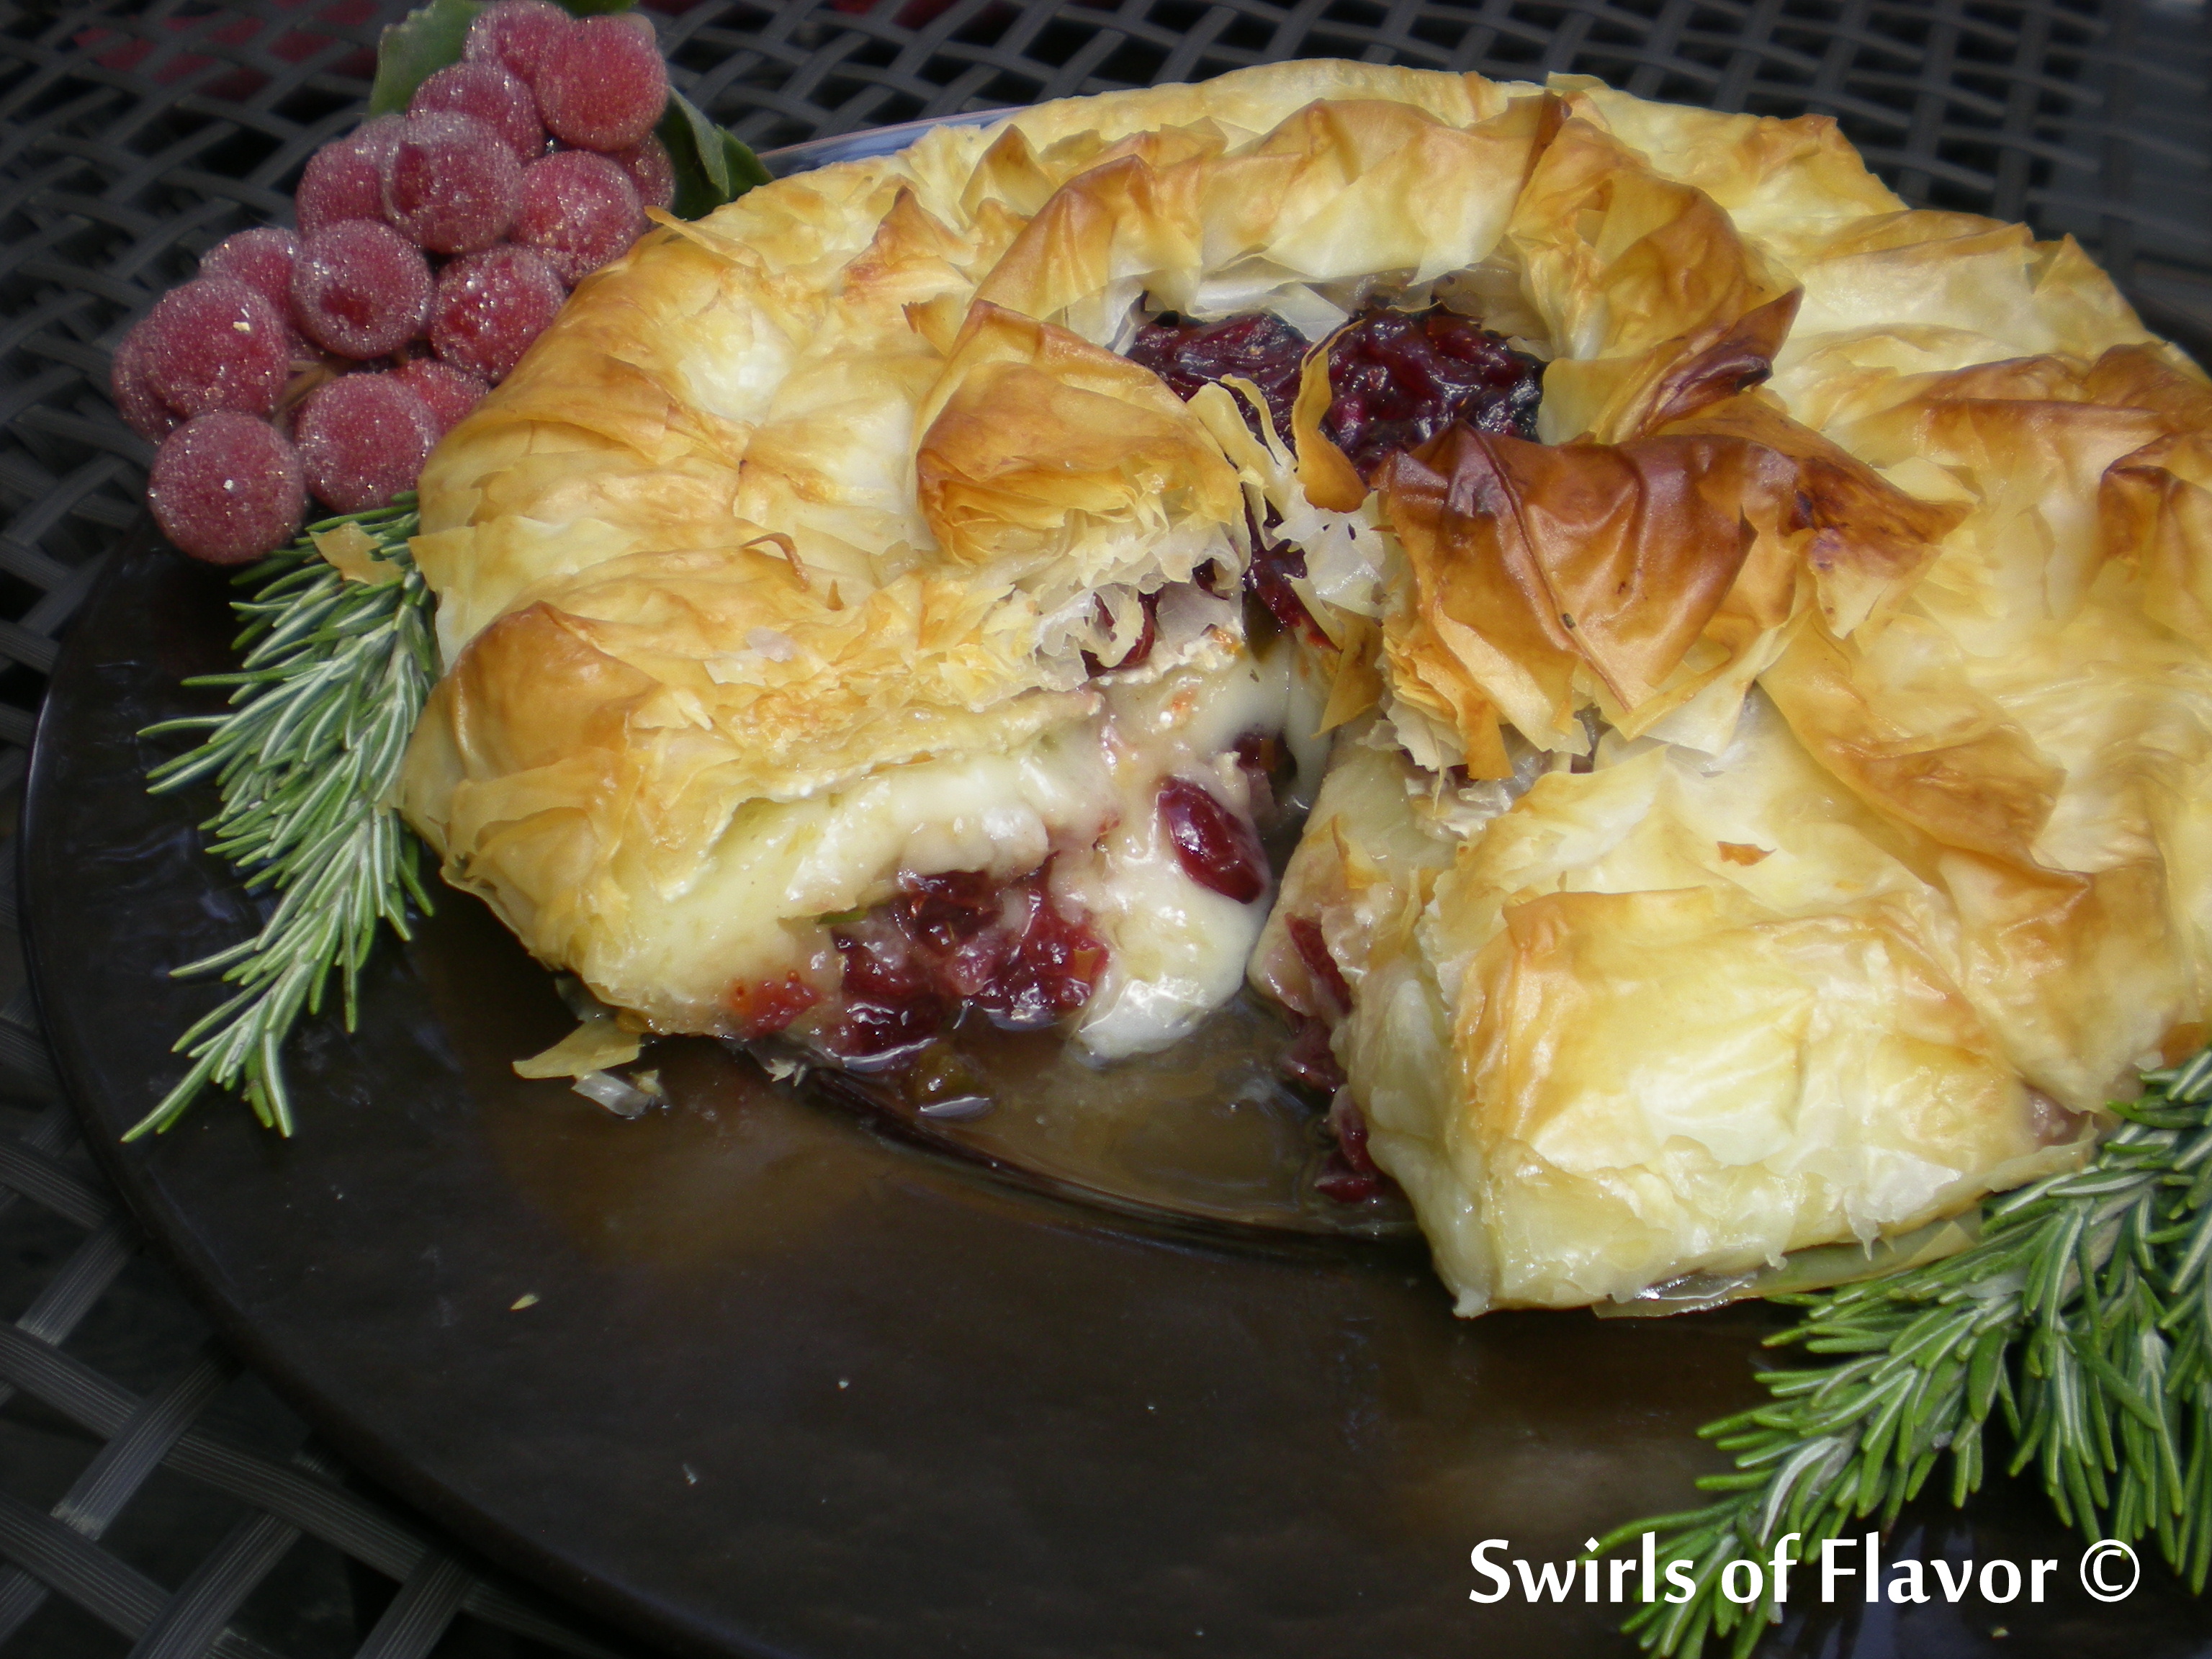 Phyllo Wrapped Brandied Cranberry Baked Brie is an easy recipe of phyllo dough layers surrounding a cranberry brandy topped Brie accented with a hint of rosemary and Dijon and a touch of spice. This holiday appetizer recipe will impress your guests for sure! #bakedbrie #brandy #cranberry #phyllodough #appetizer #holiday #Thanksgiving #swirlsofflavor